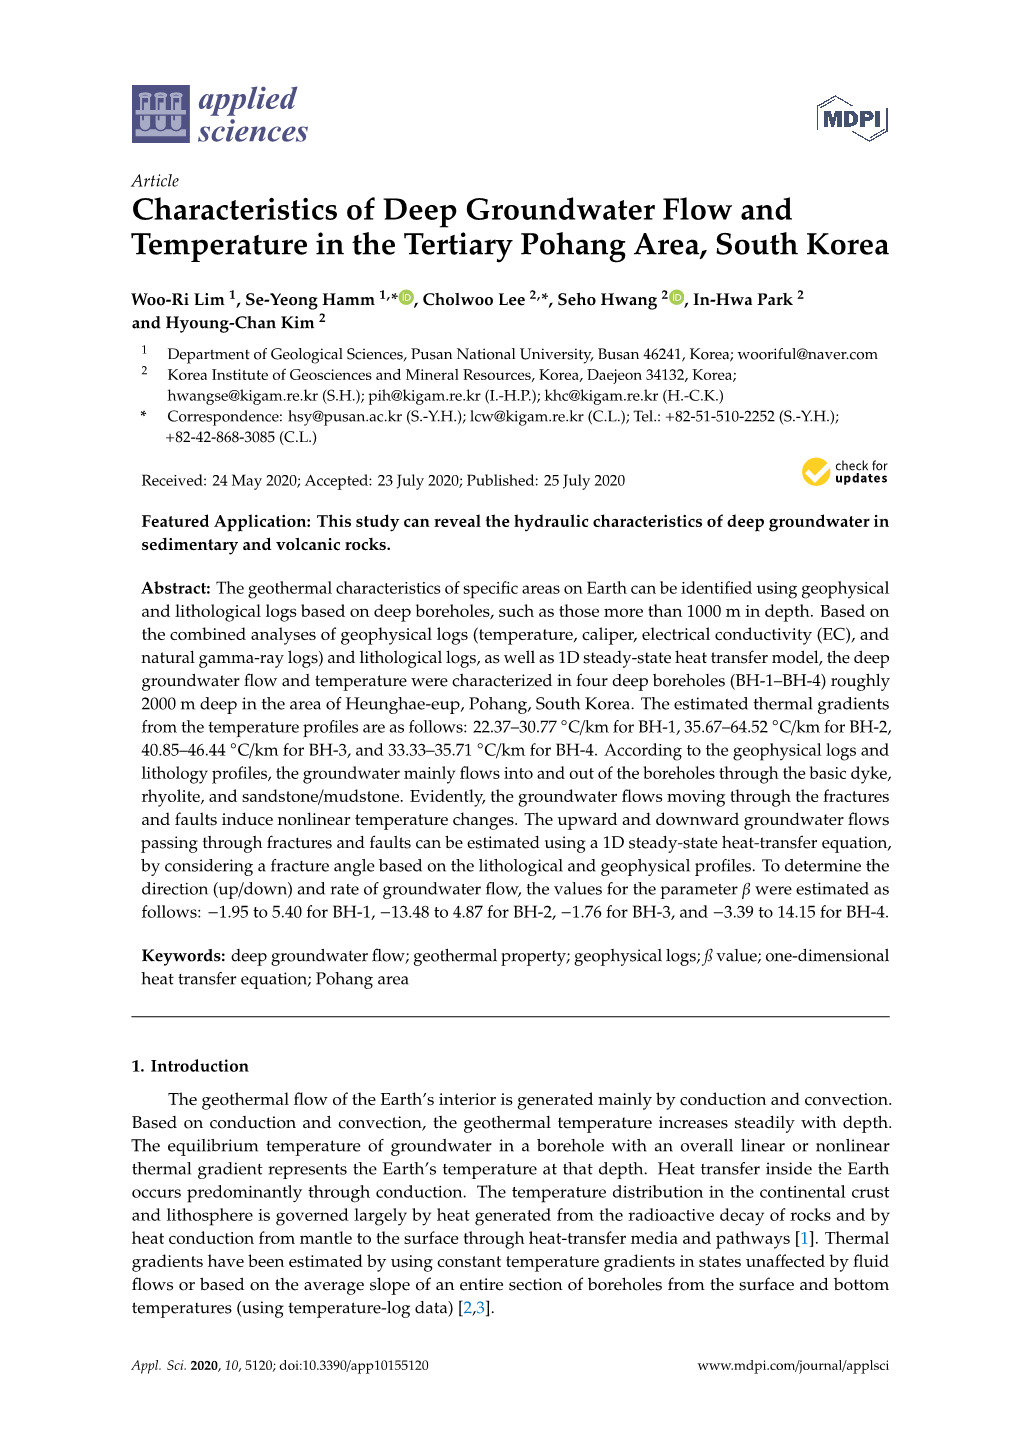 Characteristics of Deep Groundwater Flow and Temperature in the Tertiary Pohang Area, South Korea